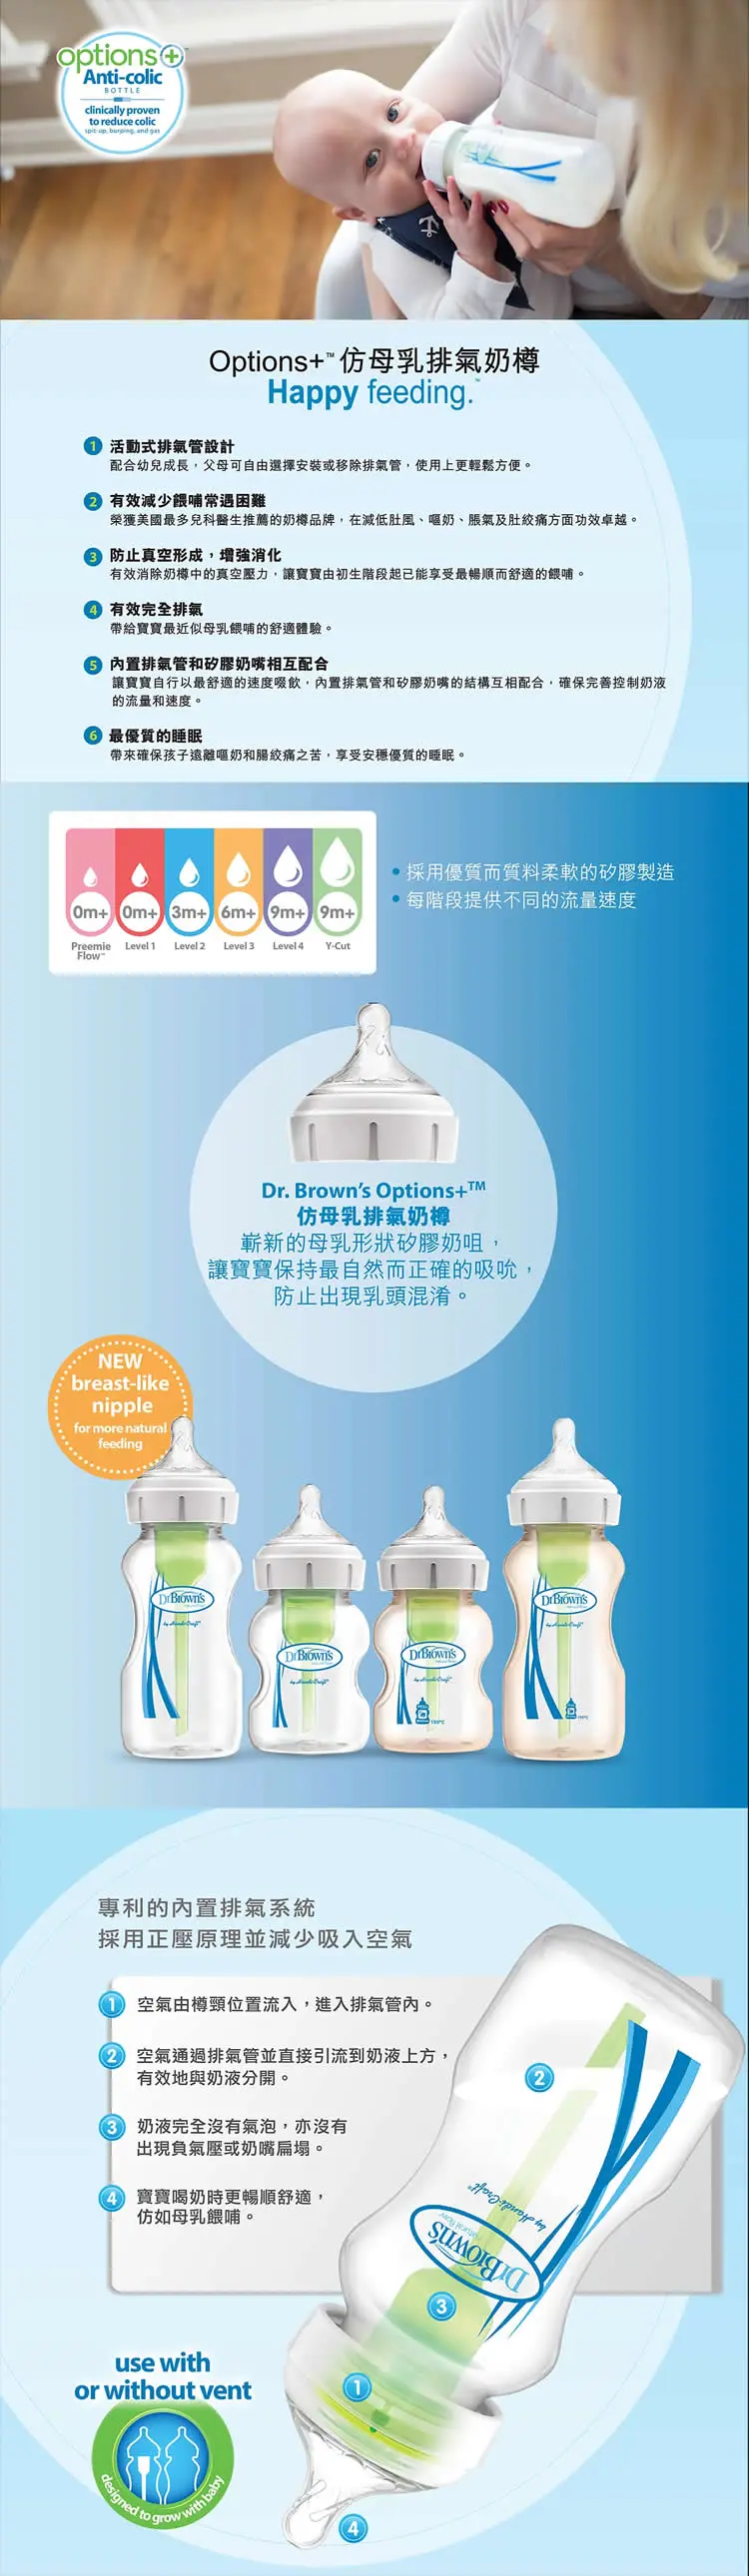 Dr. Brown's Options+ 仿母乳排氣奶樽